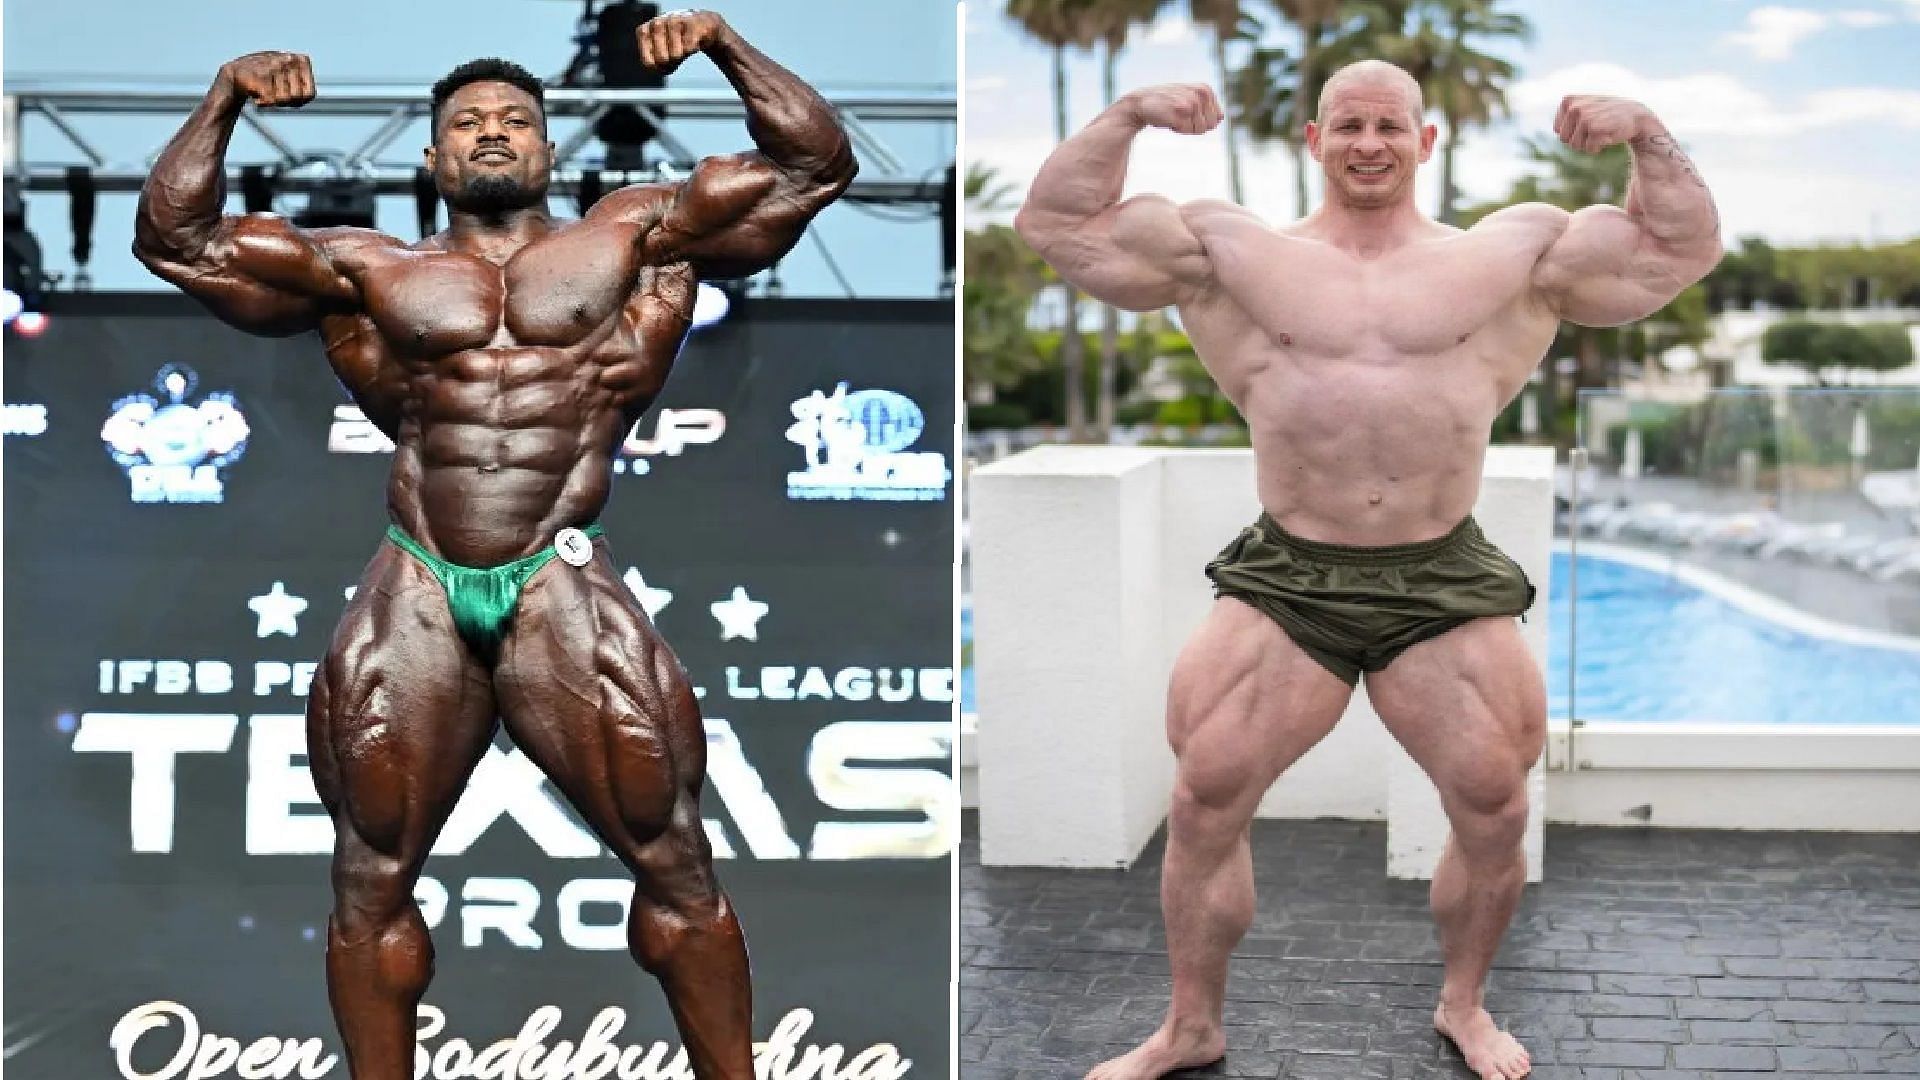 Andrew Jacked left and Michal Krizo right